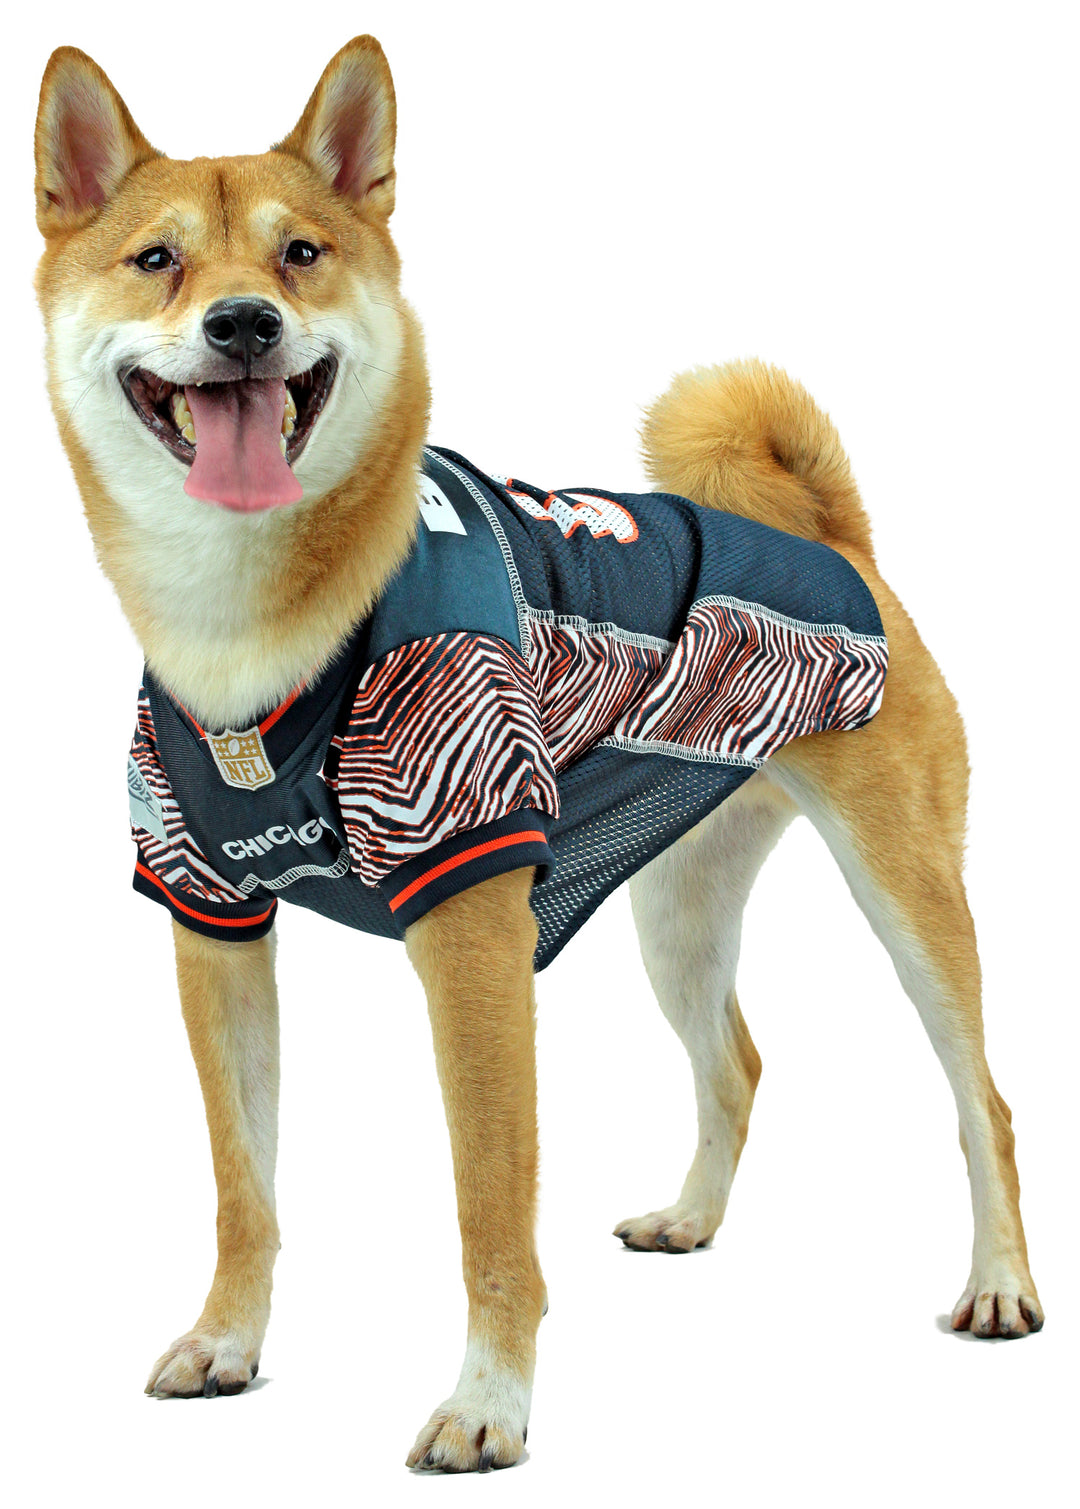 Zubaz X Pets First NFL Philadelphia Eagles Jersey For Dogs & Cats